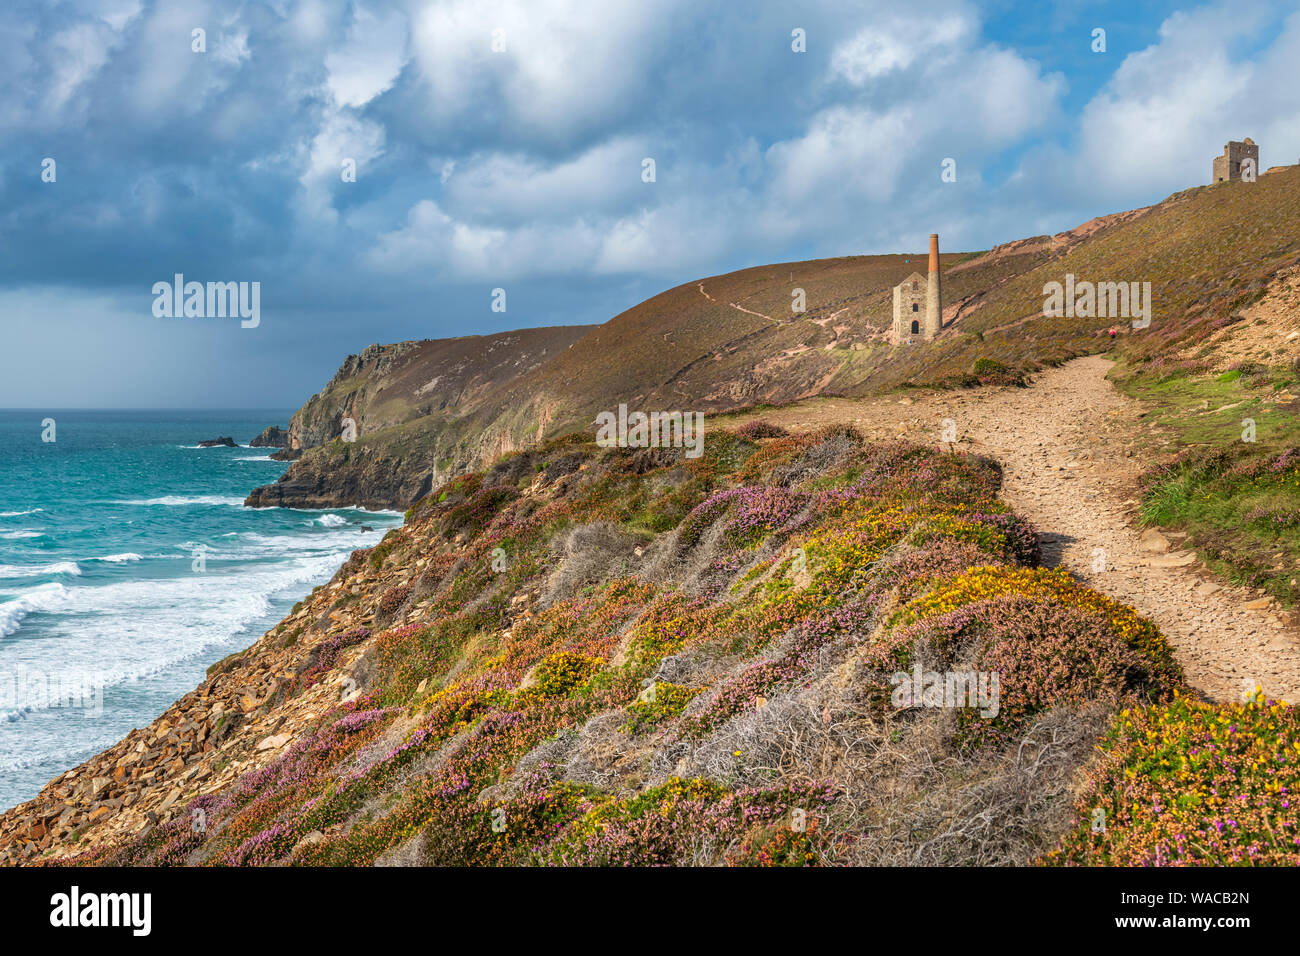 Wheal Coates, near St. Agnes in North Cornwall, England. Monday 19th August 2019. UK Weather. Sunshine and heavy showers don't deter visitors to 'Poldark Country' and the spectacular views at Wheal Coates near St. Agnes Beacon in North Cornwall. Credit: Terry Mathews/Alamy Live News Stock Photo